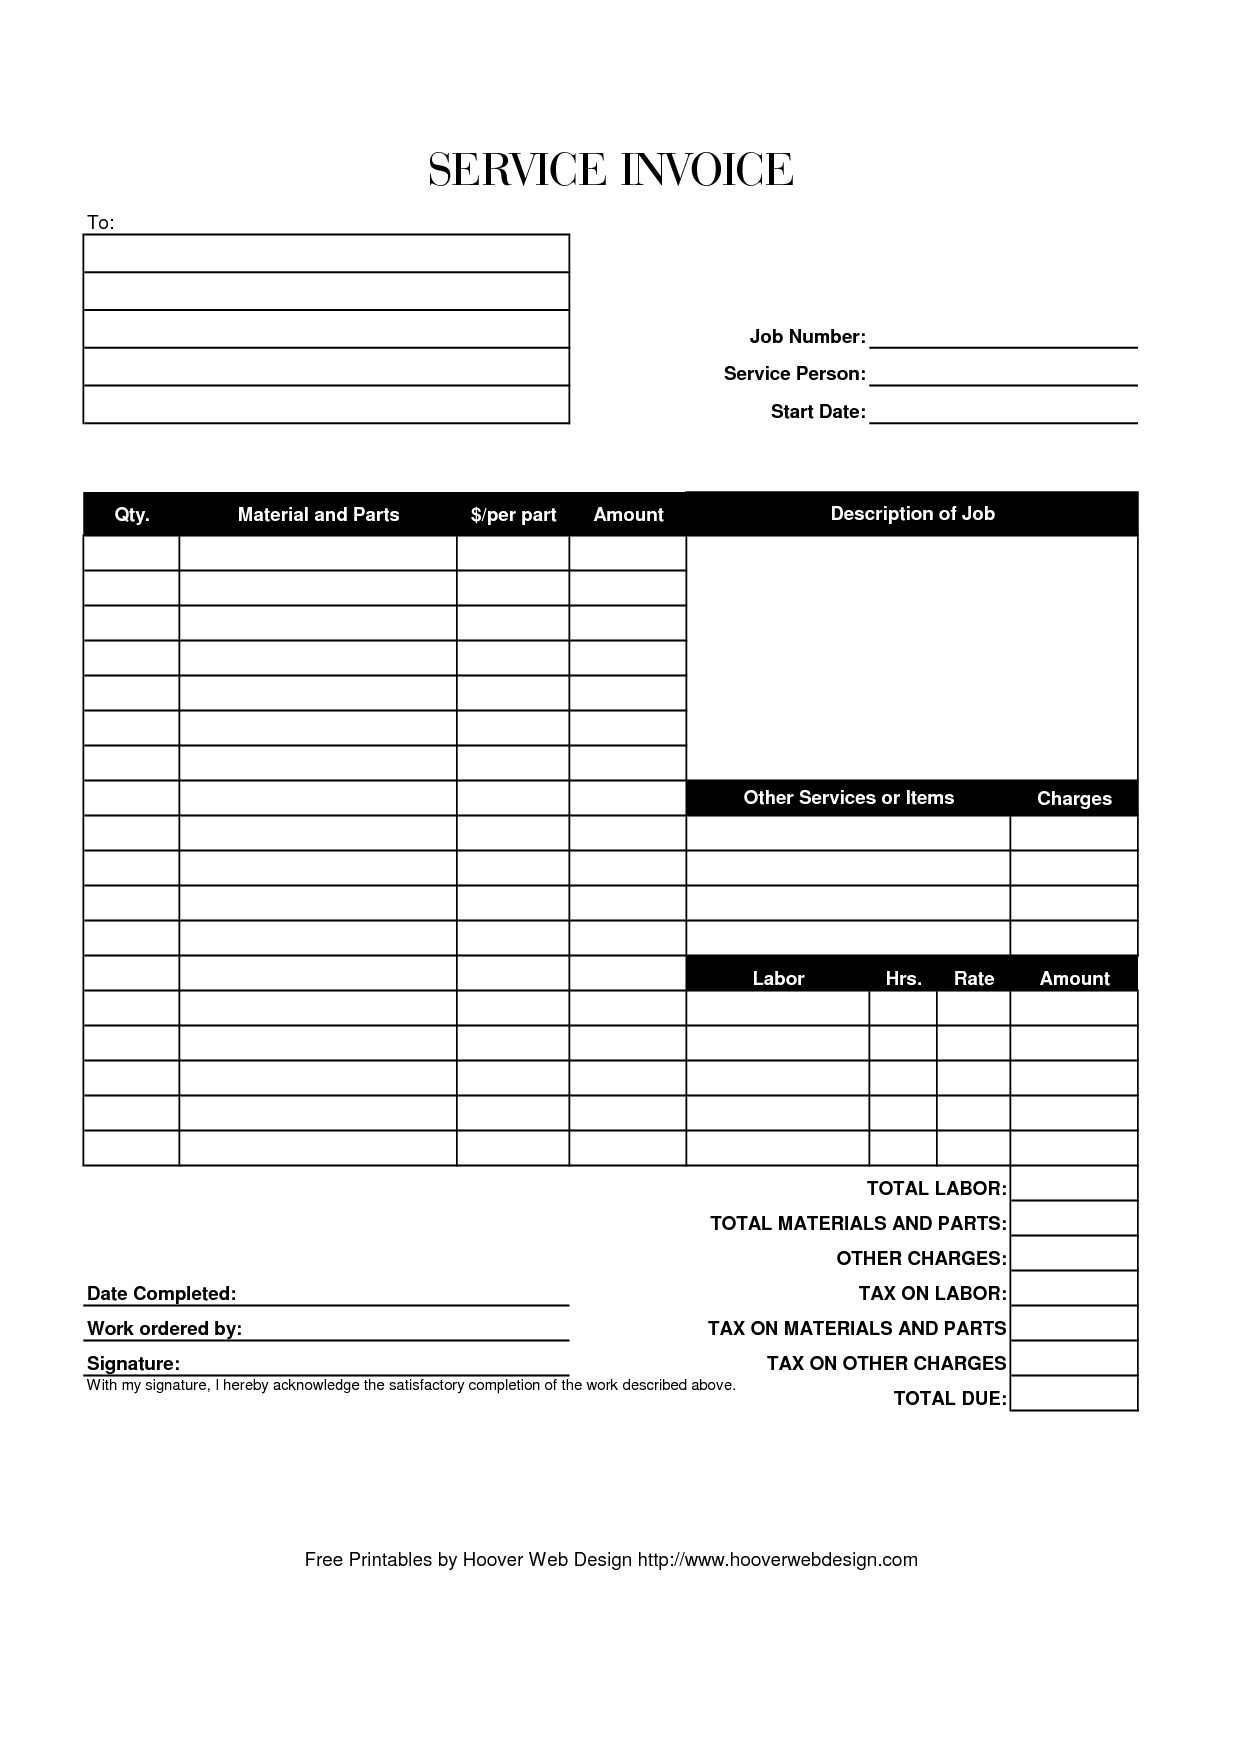 Free Printable Service Invoice | Shop Fresh - Free Printable Out Of Service Sign